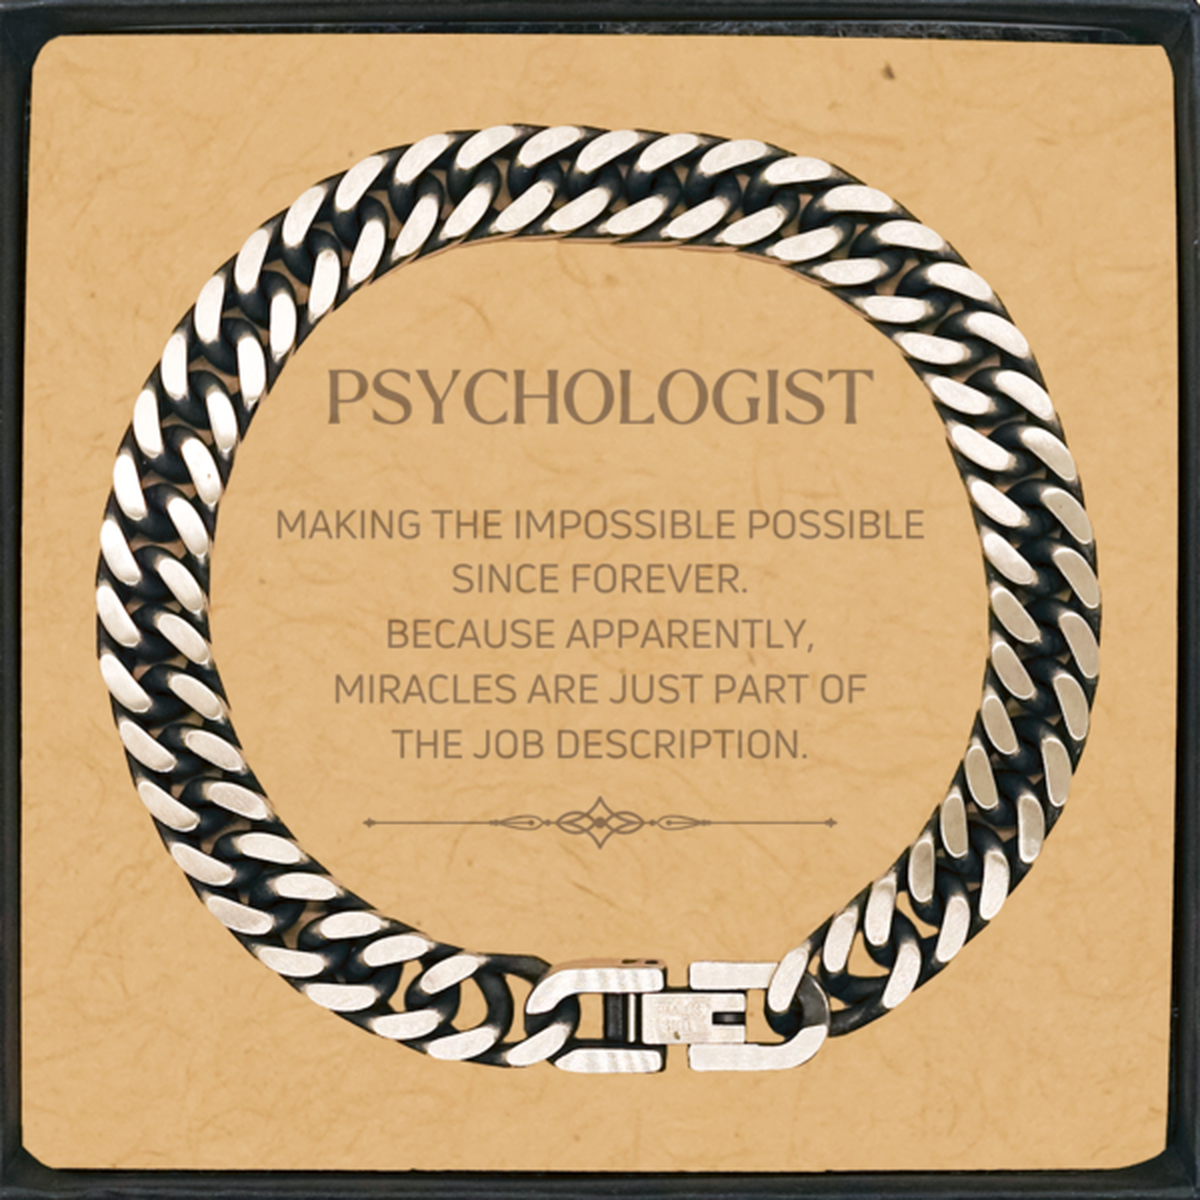 Funny Psychologist Gifts, Miracles are just part of the job description, Inspirational Birthday Cuban Link Chain Bracelet For Psychologist, Men, Women, Coworkers, Friends, Boss